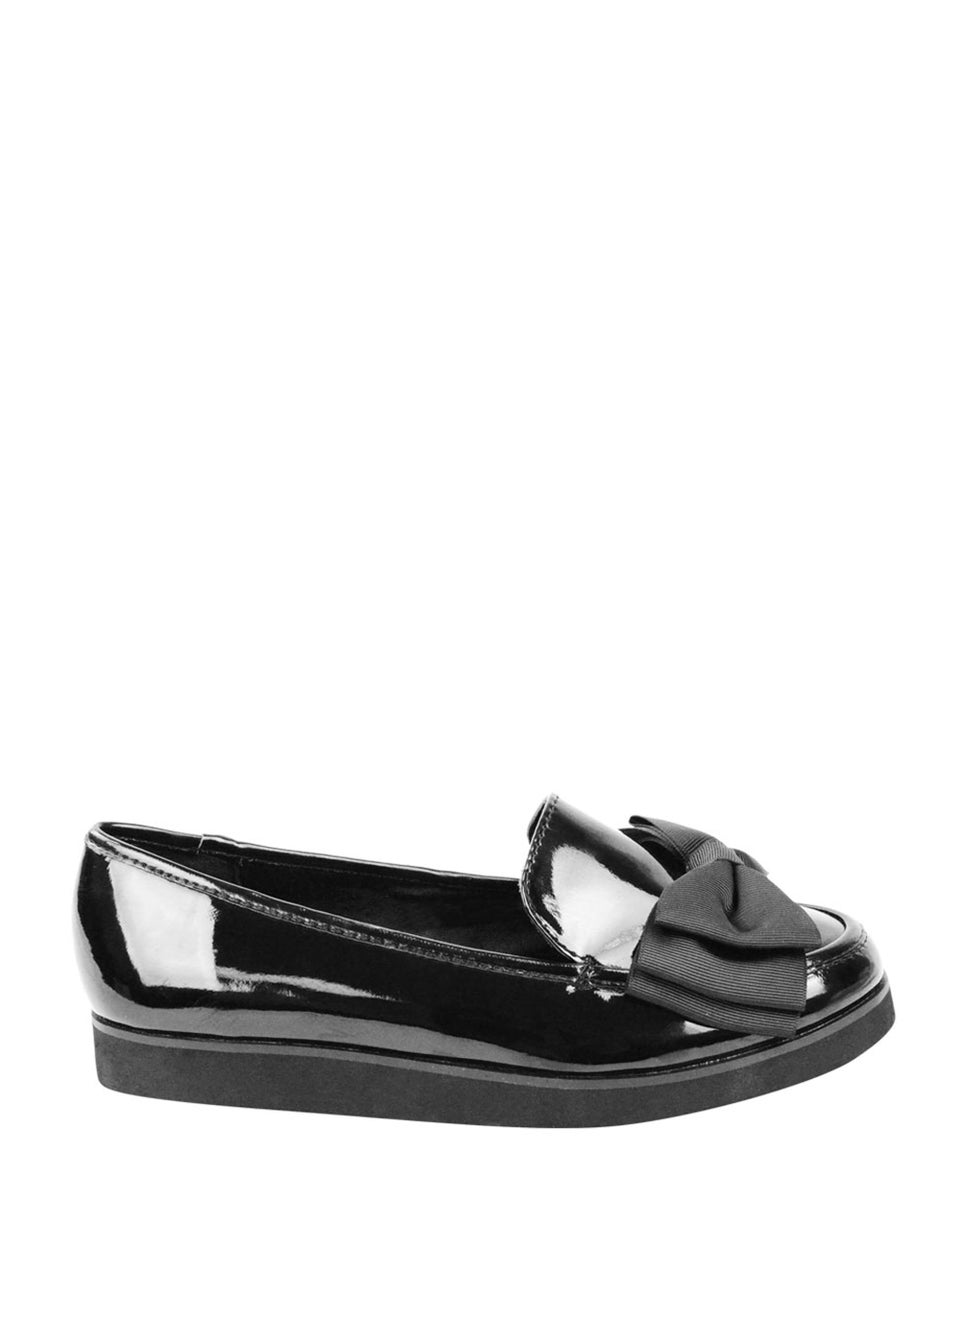 Where's That From Black Patent Pu Alpha Slip On Loafer - Matalan